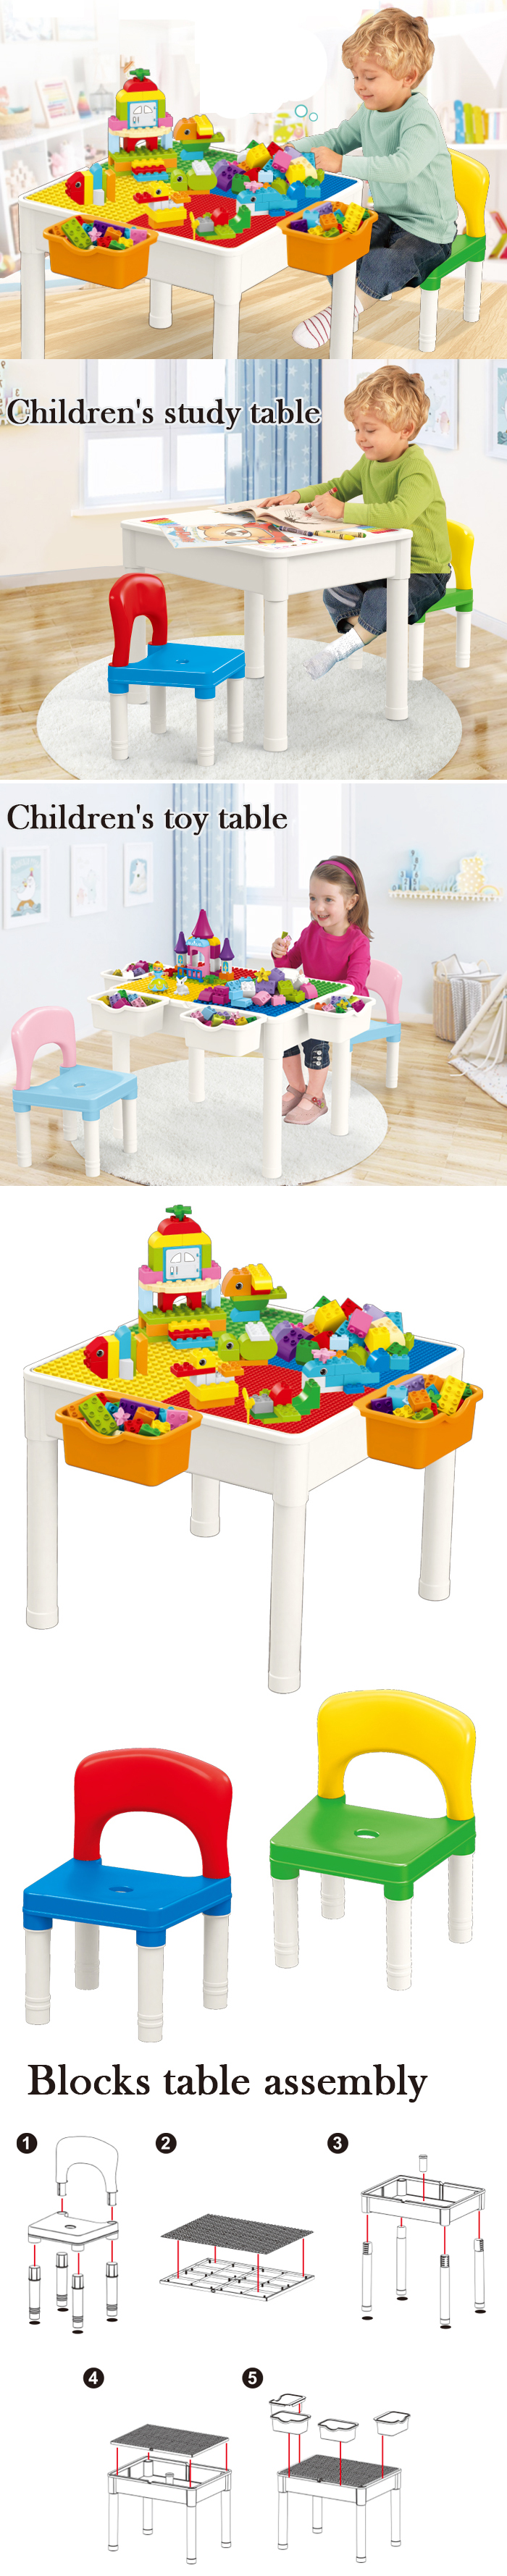 WOMA TOYS Wholesale OEM ODM Large Building Blocks Table Learning Big Brick Play Activity For Kids Creative Baby Educativos